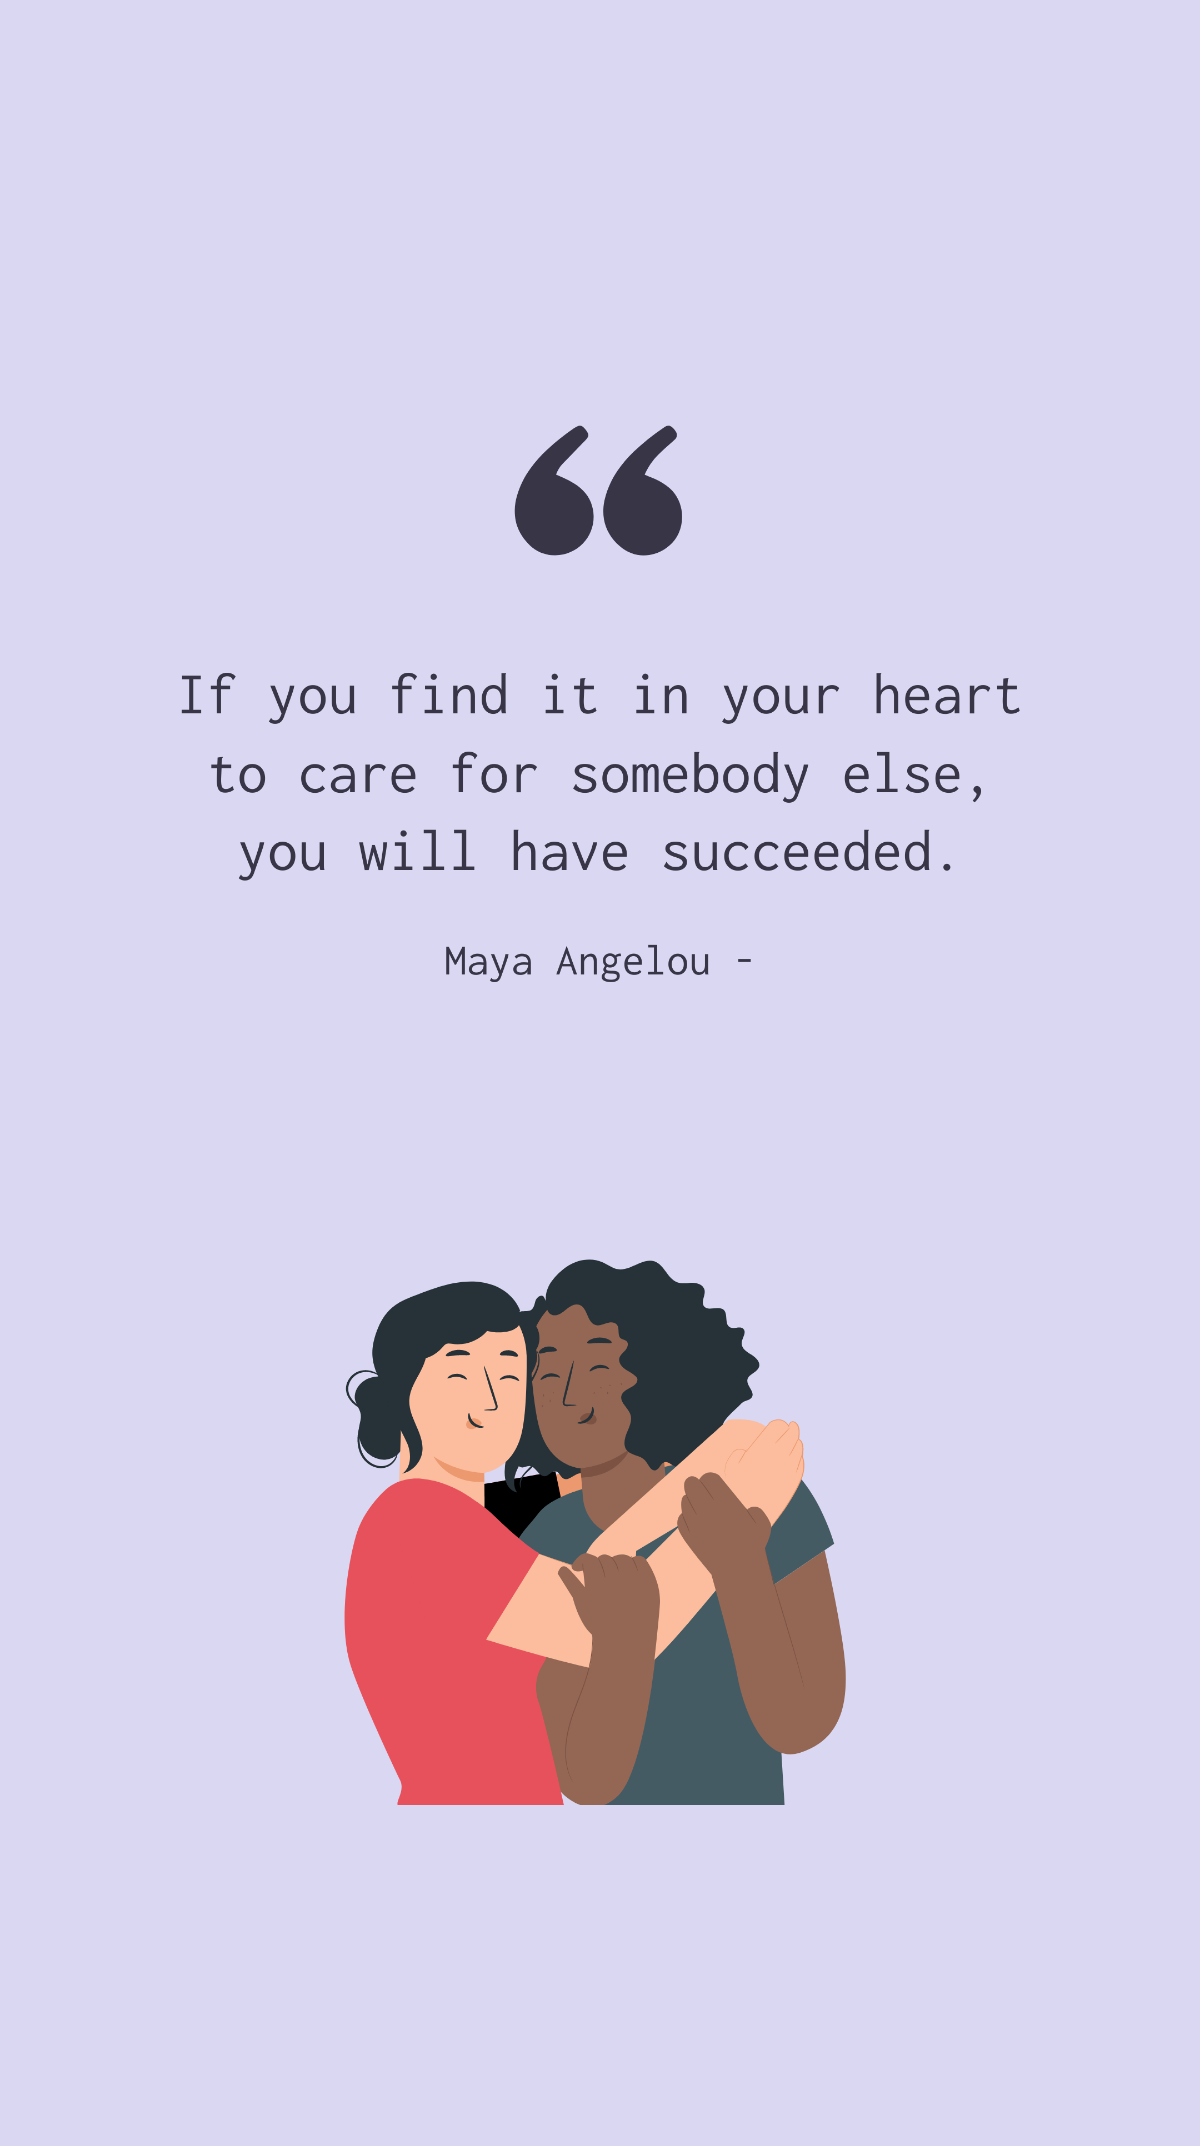 Maya Angelou - If you find it in your heart to care for somebody else, you will have succeeded.